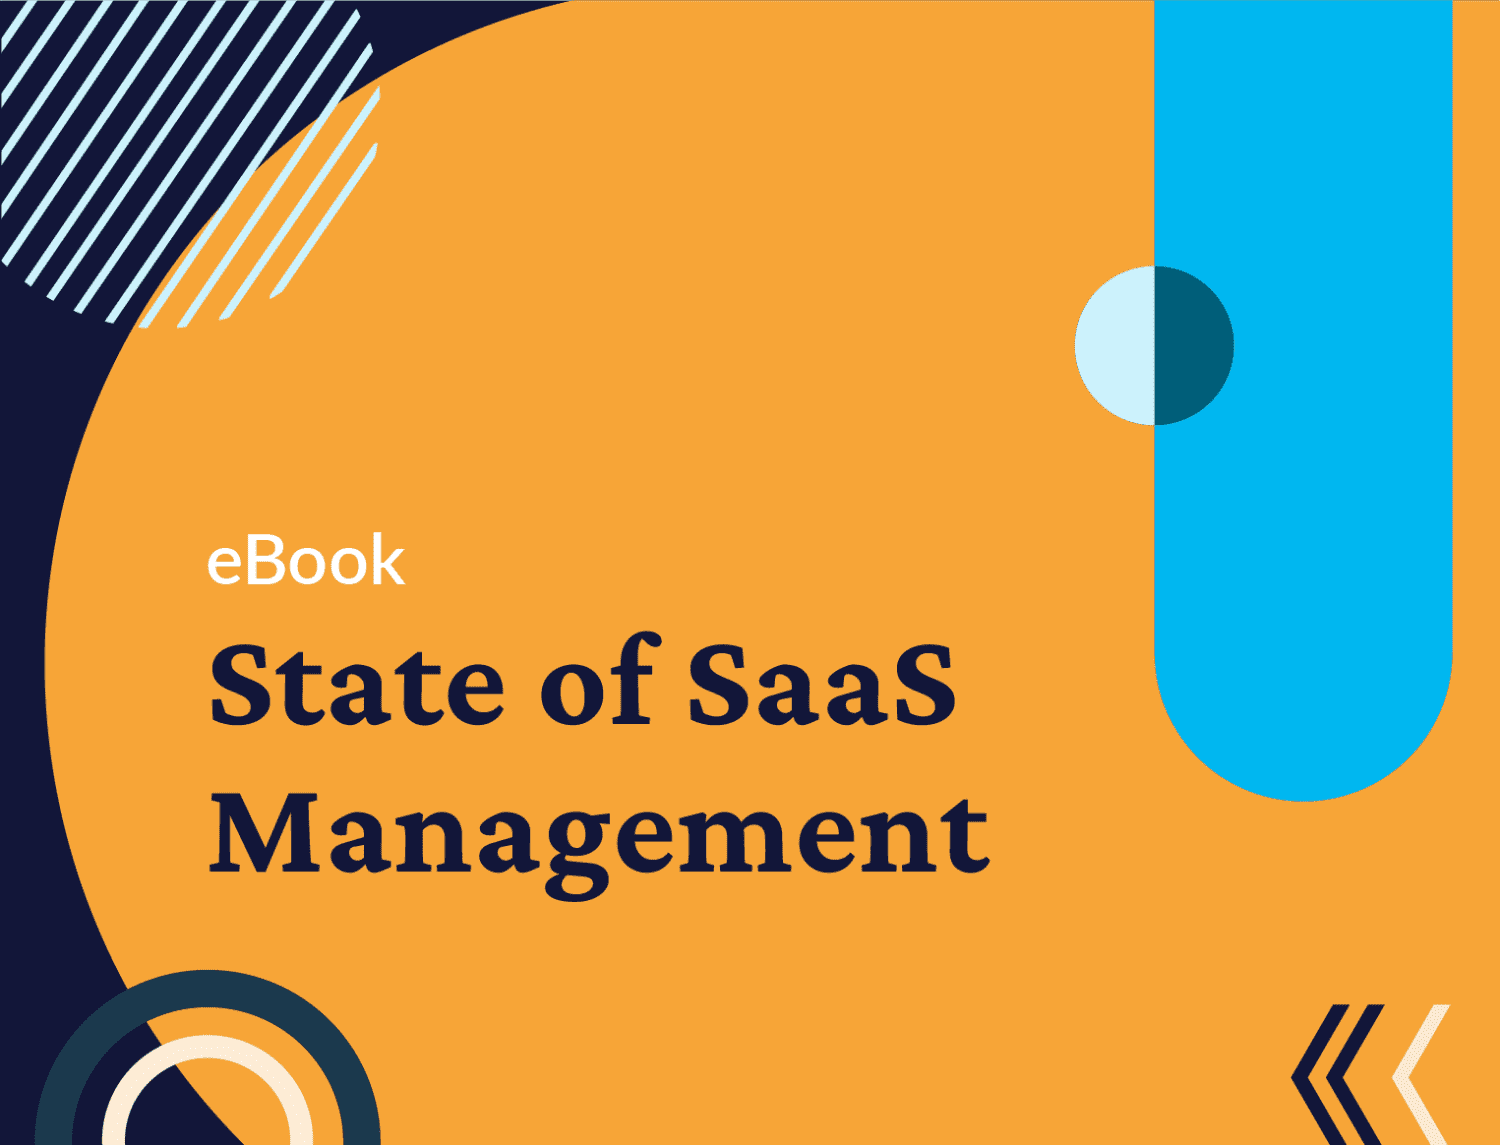 The State of SaaS Management in 2021